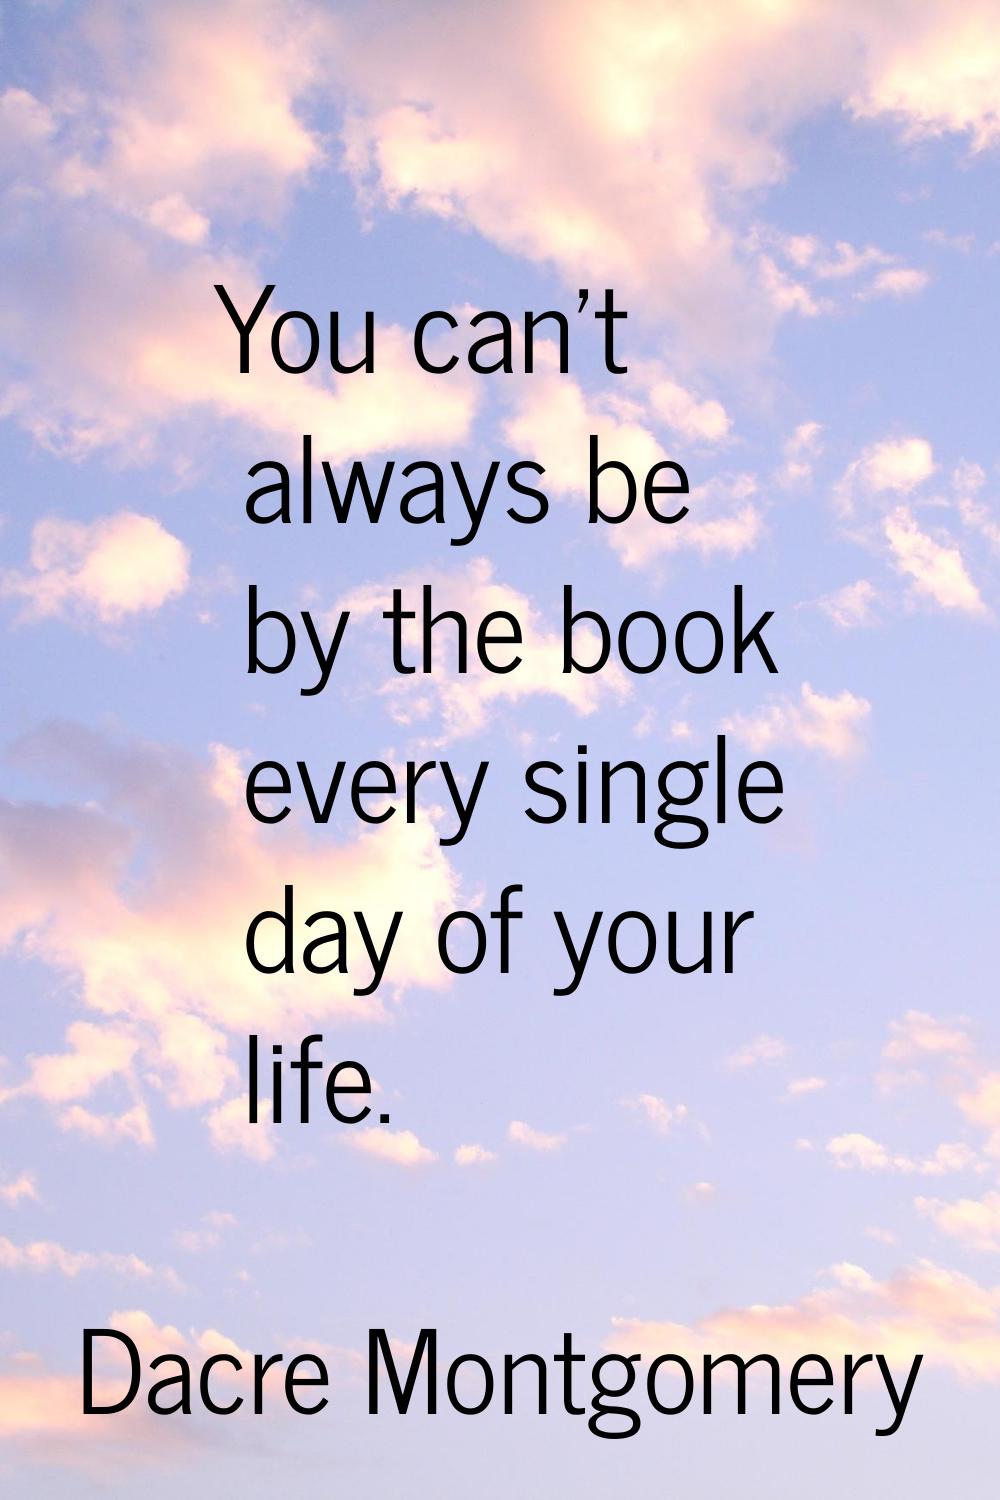 You can't always be by the book every single day of your life.